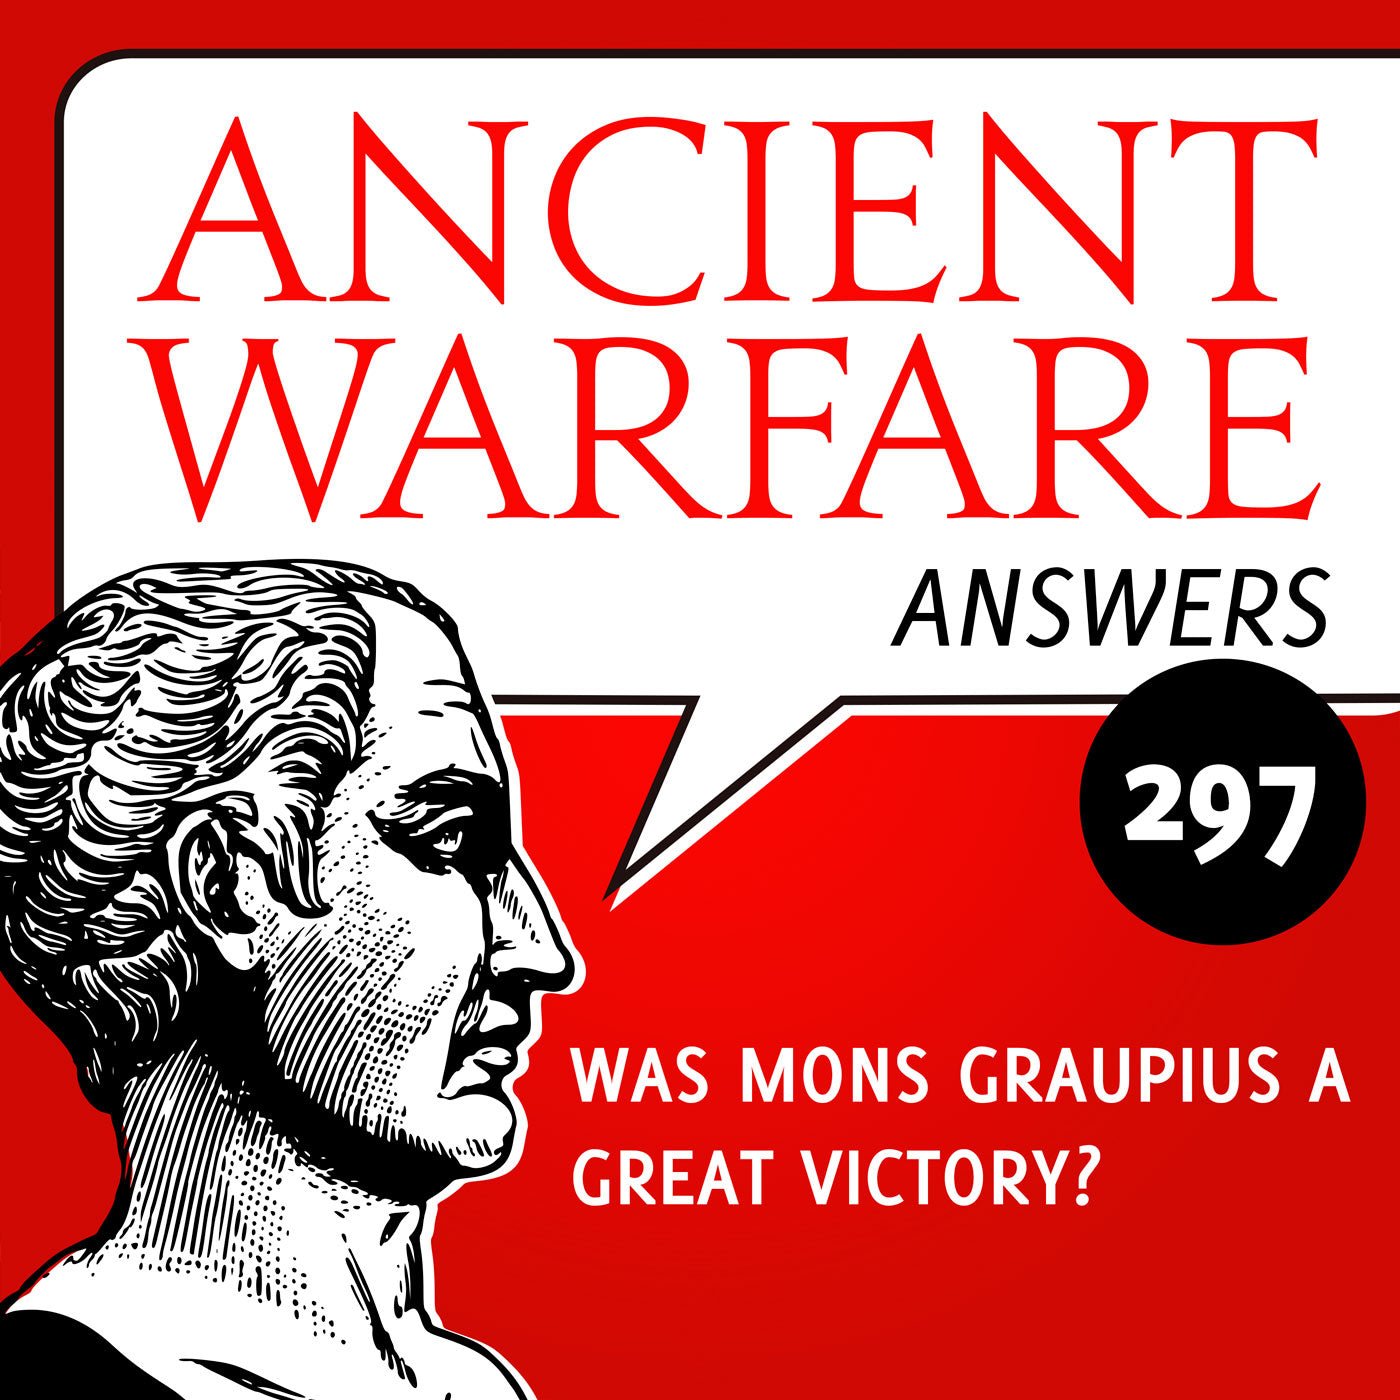 Ancient Warfare Answers (297): Was Mons Gaupius a great victory?